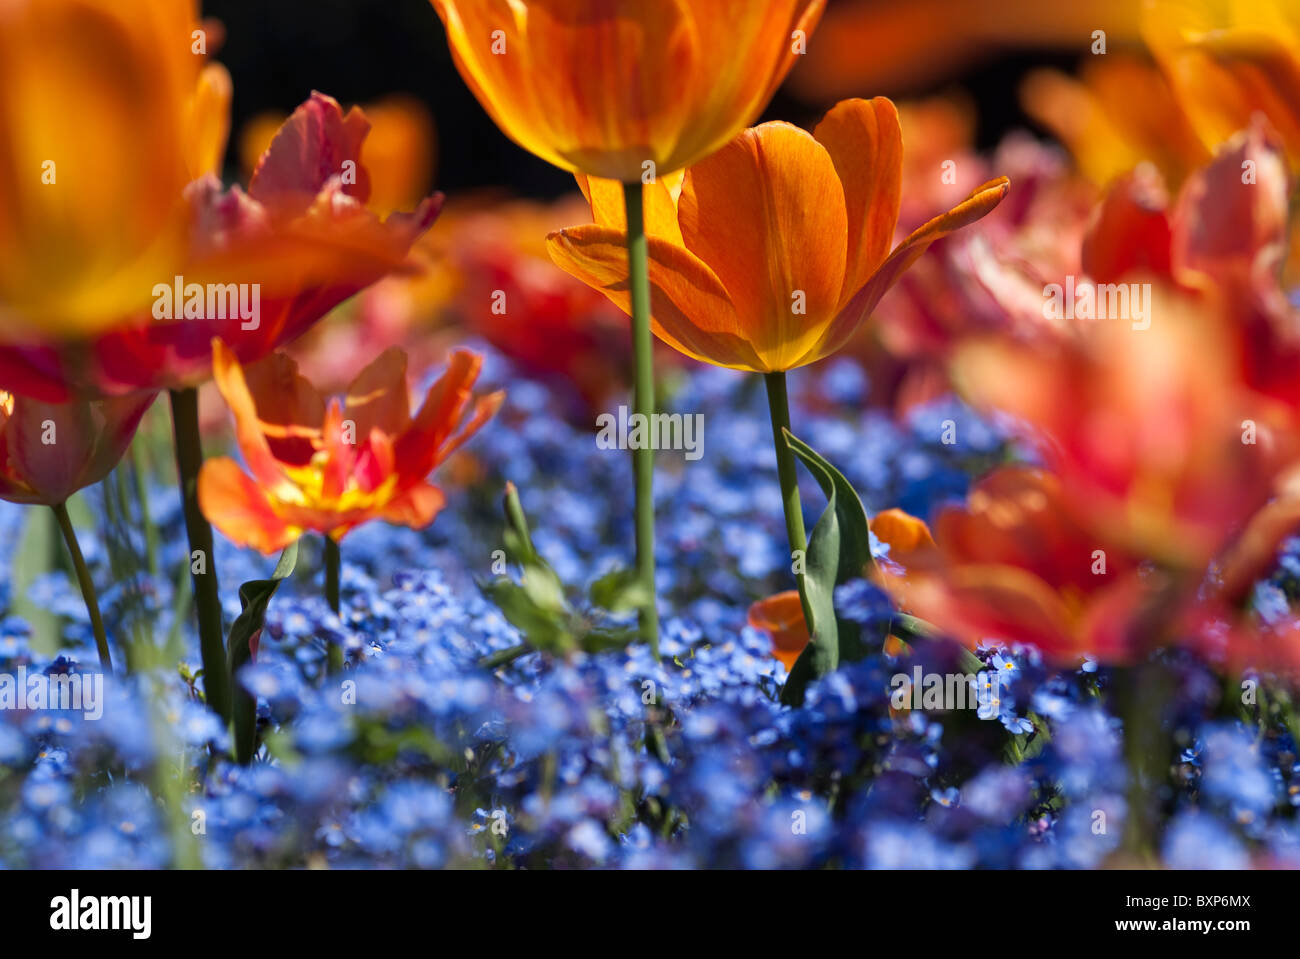 Orange tulips and forget-me-nots in Golders Hill Park Garden Stock Photo